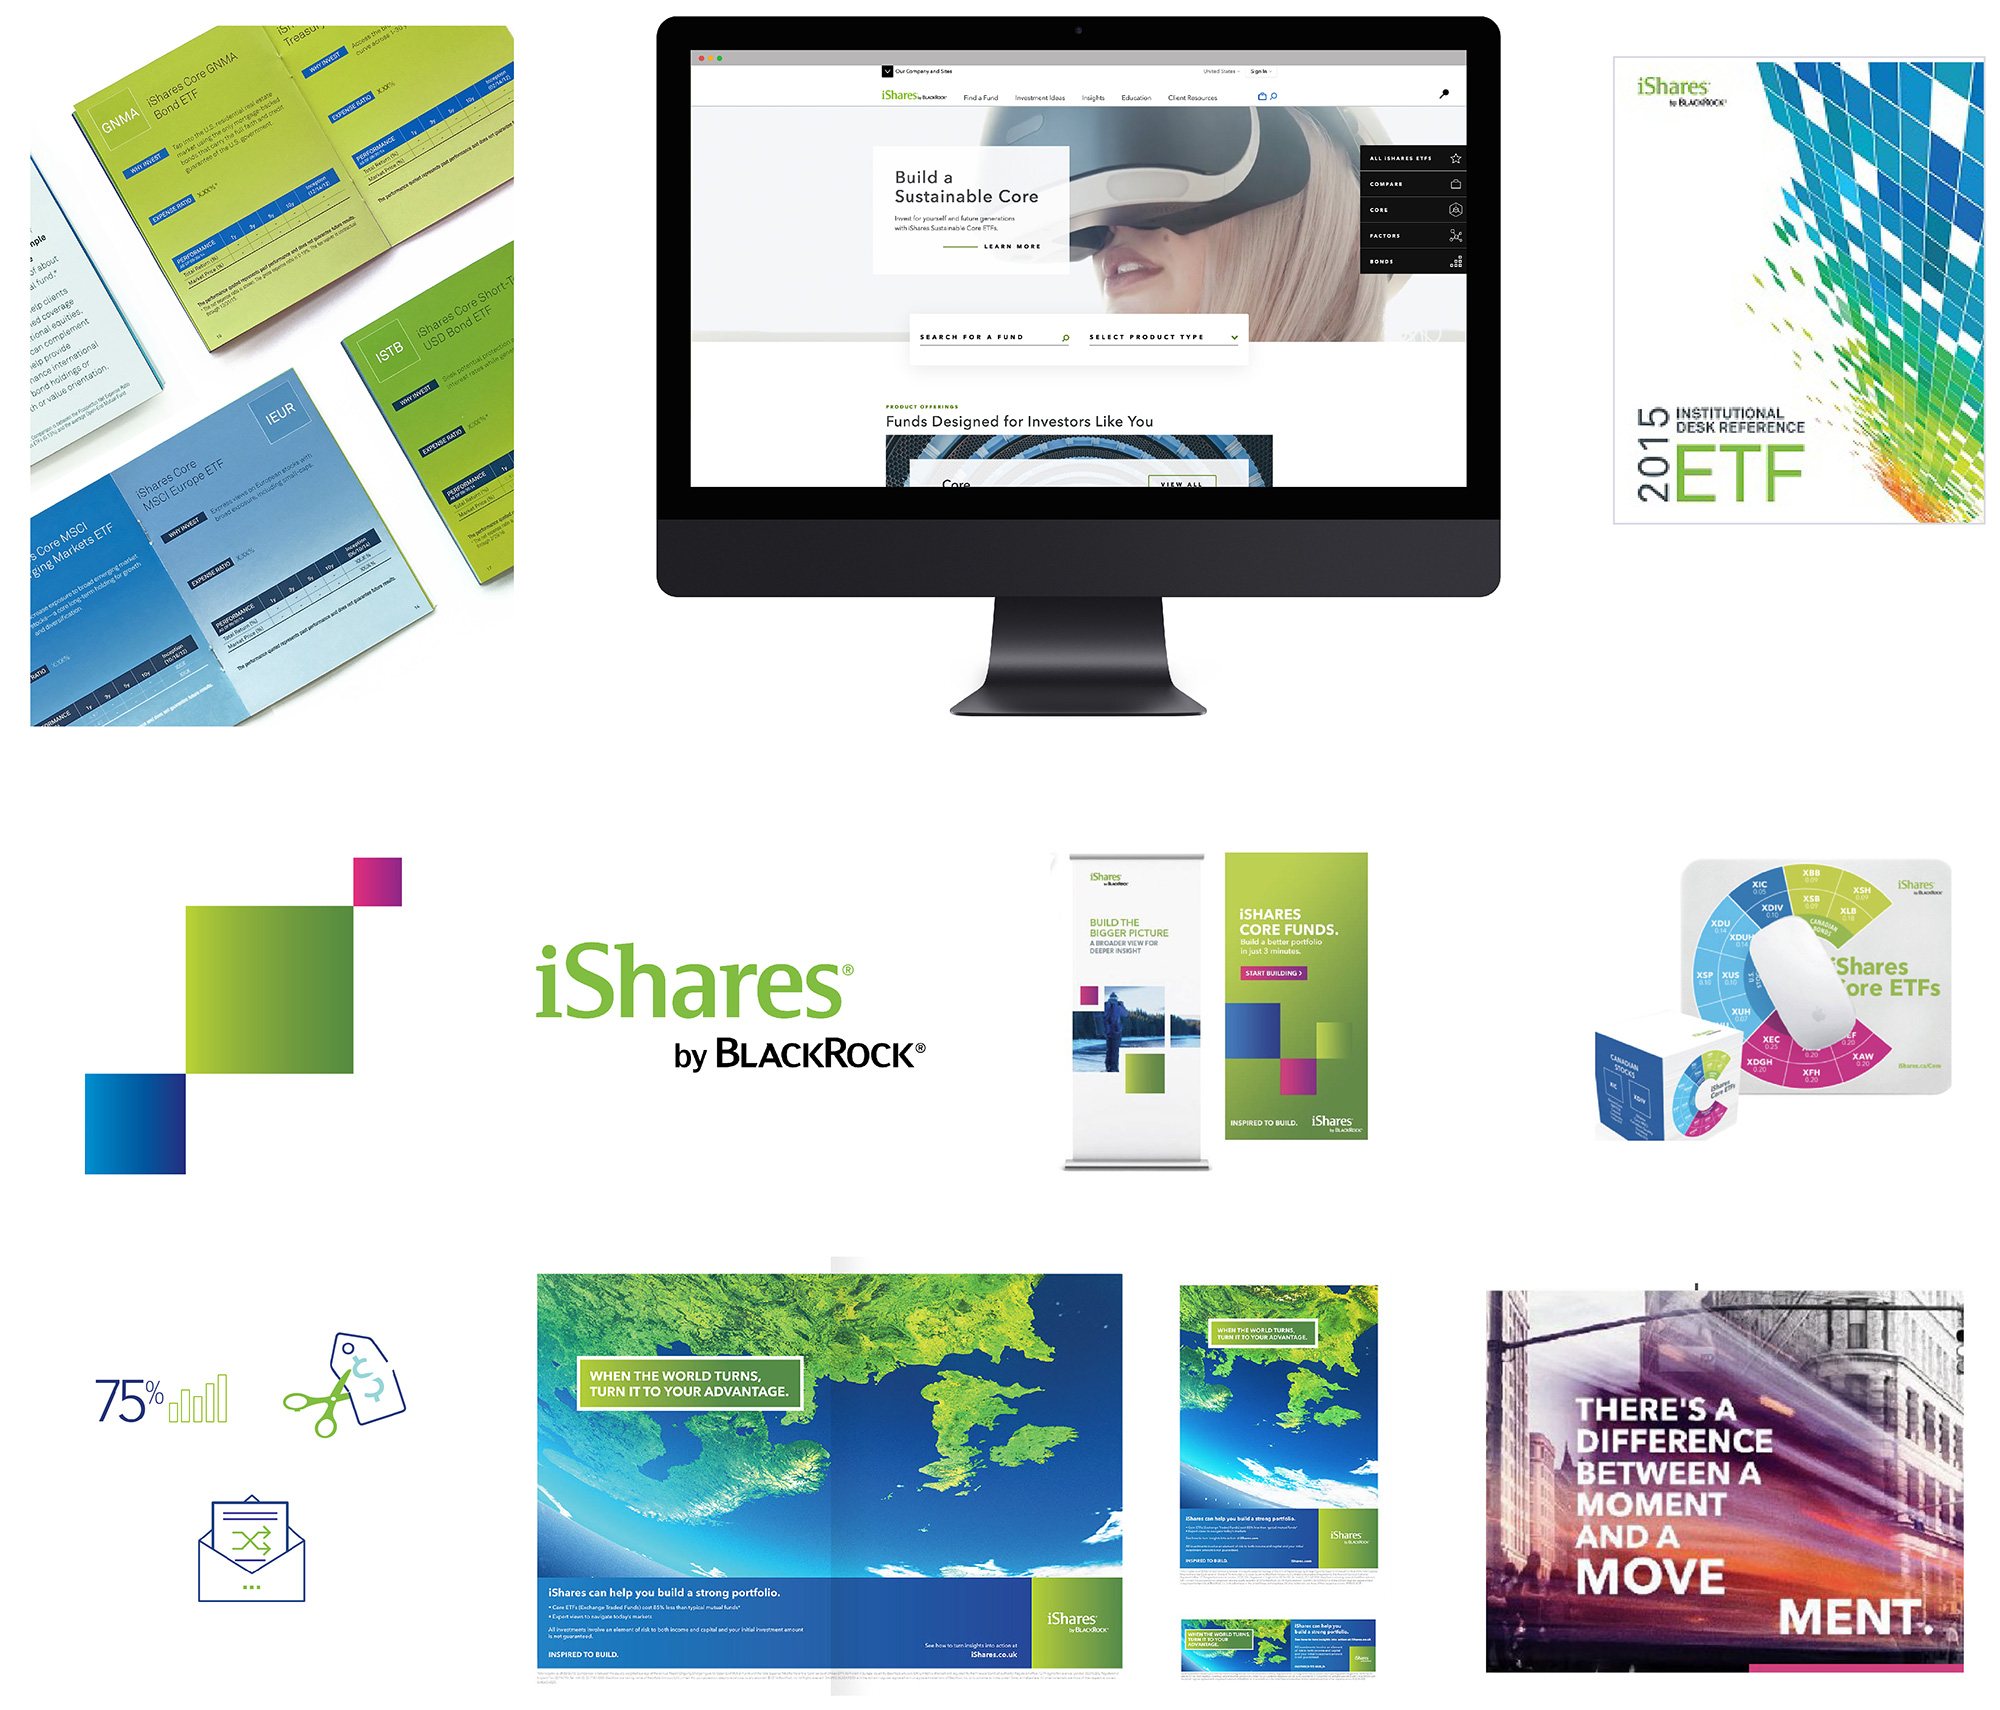 New Logo and Identity for iShares by Turner Duckworth